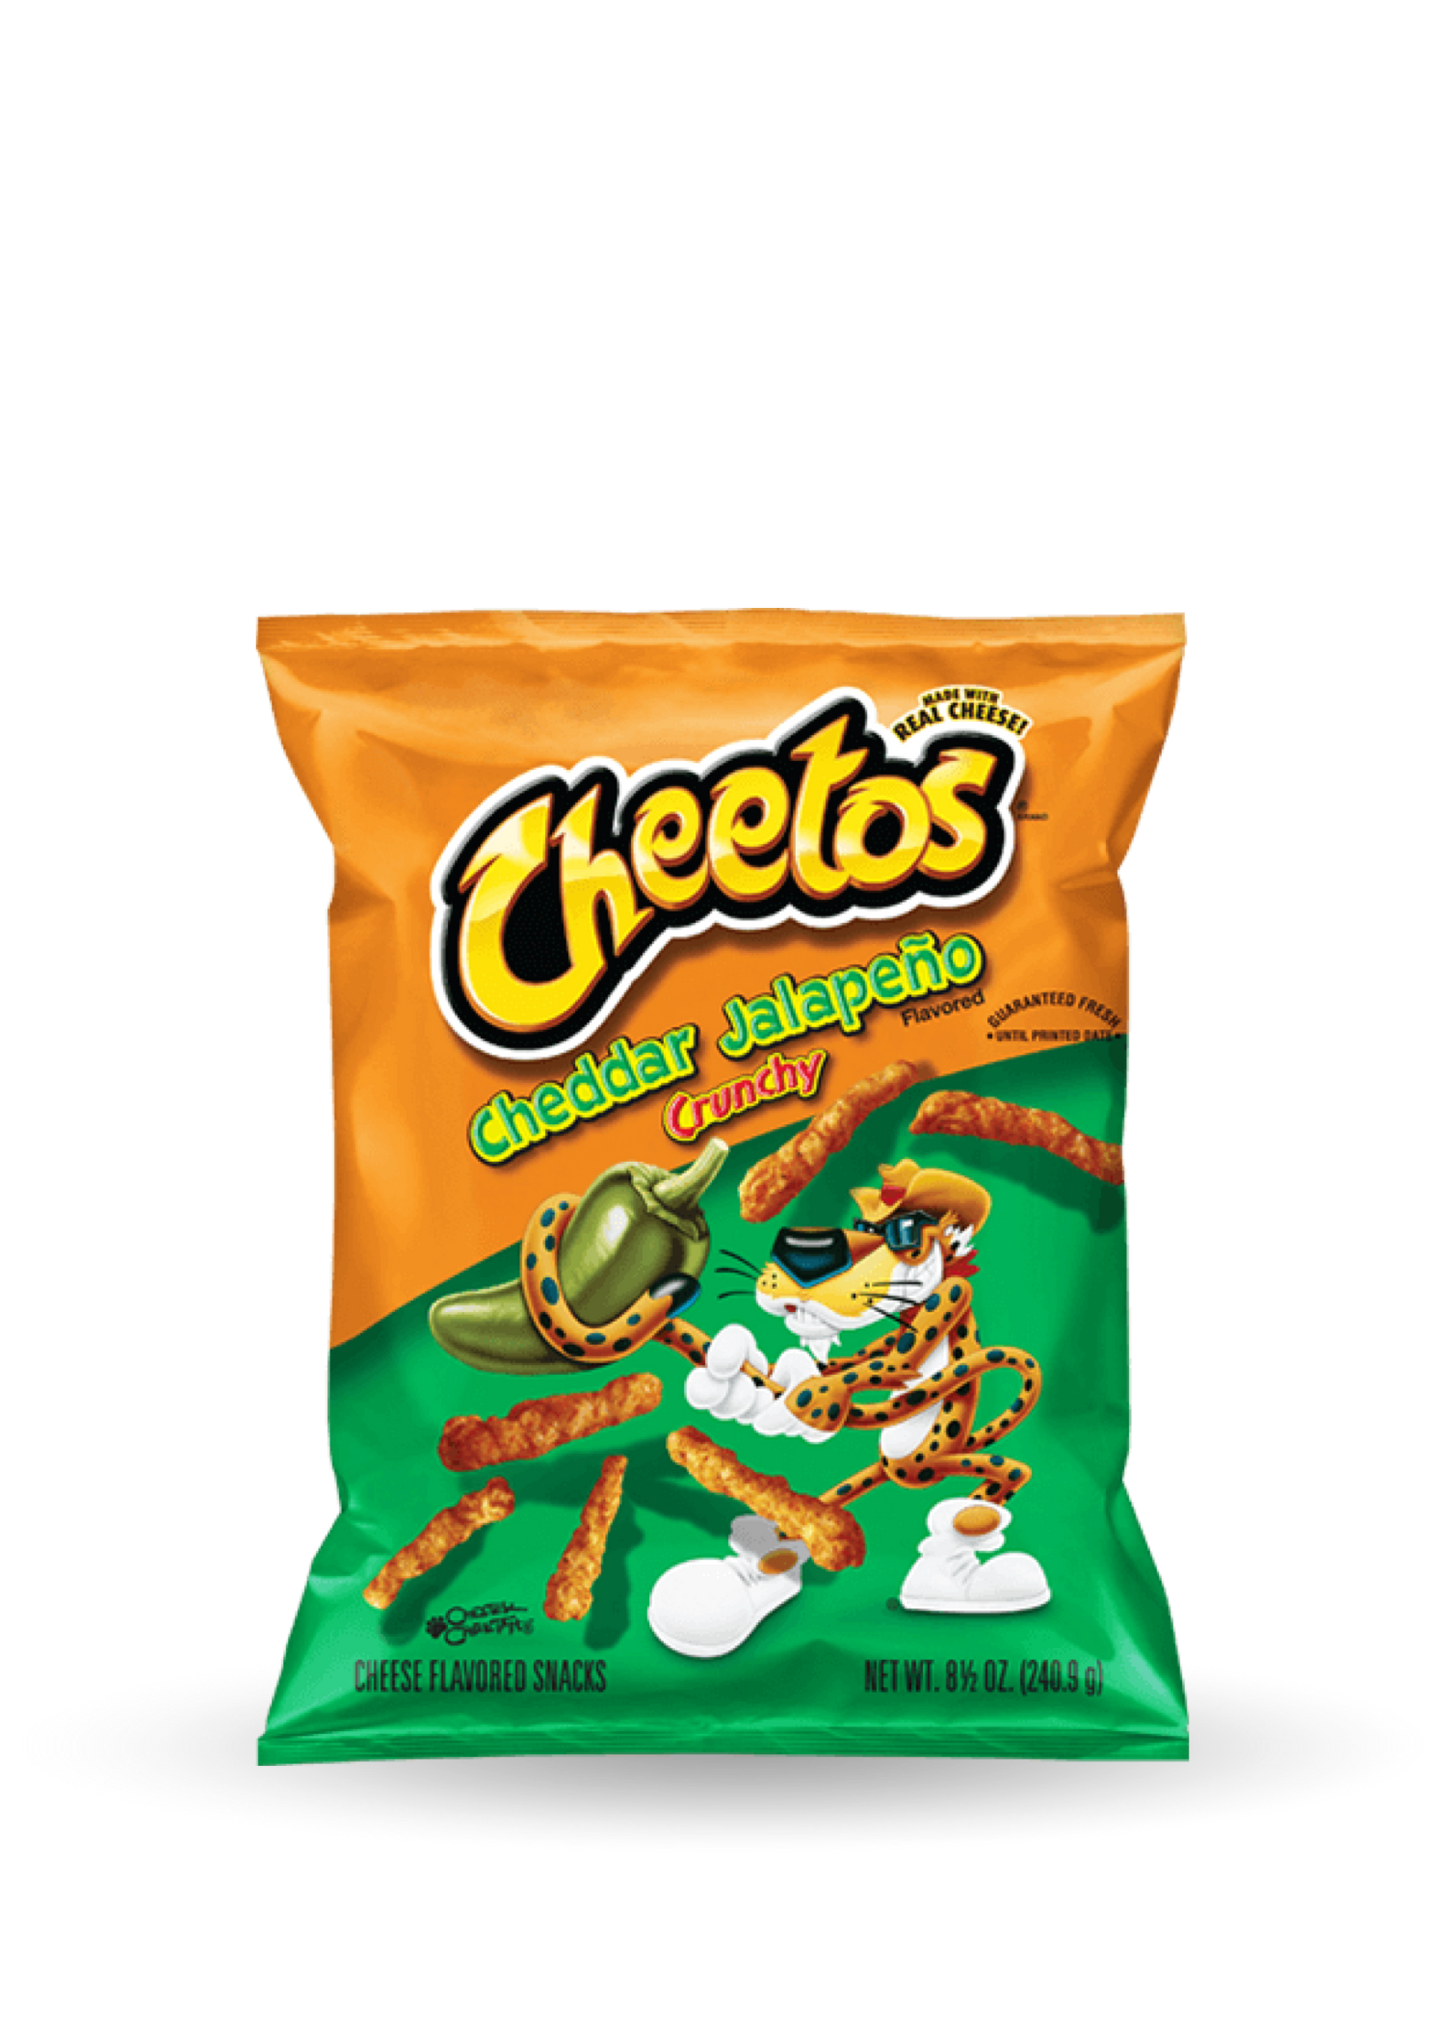 Cheetos | Cheddar Cheese and Jalapeno